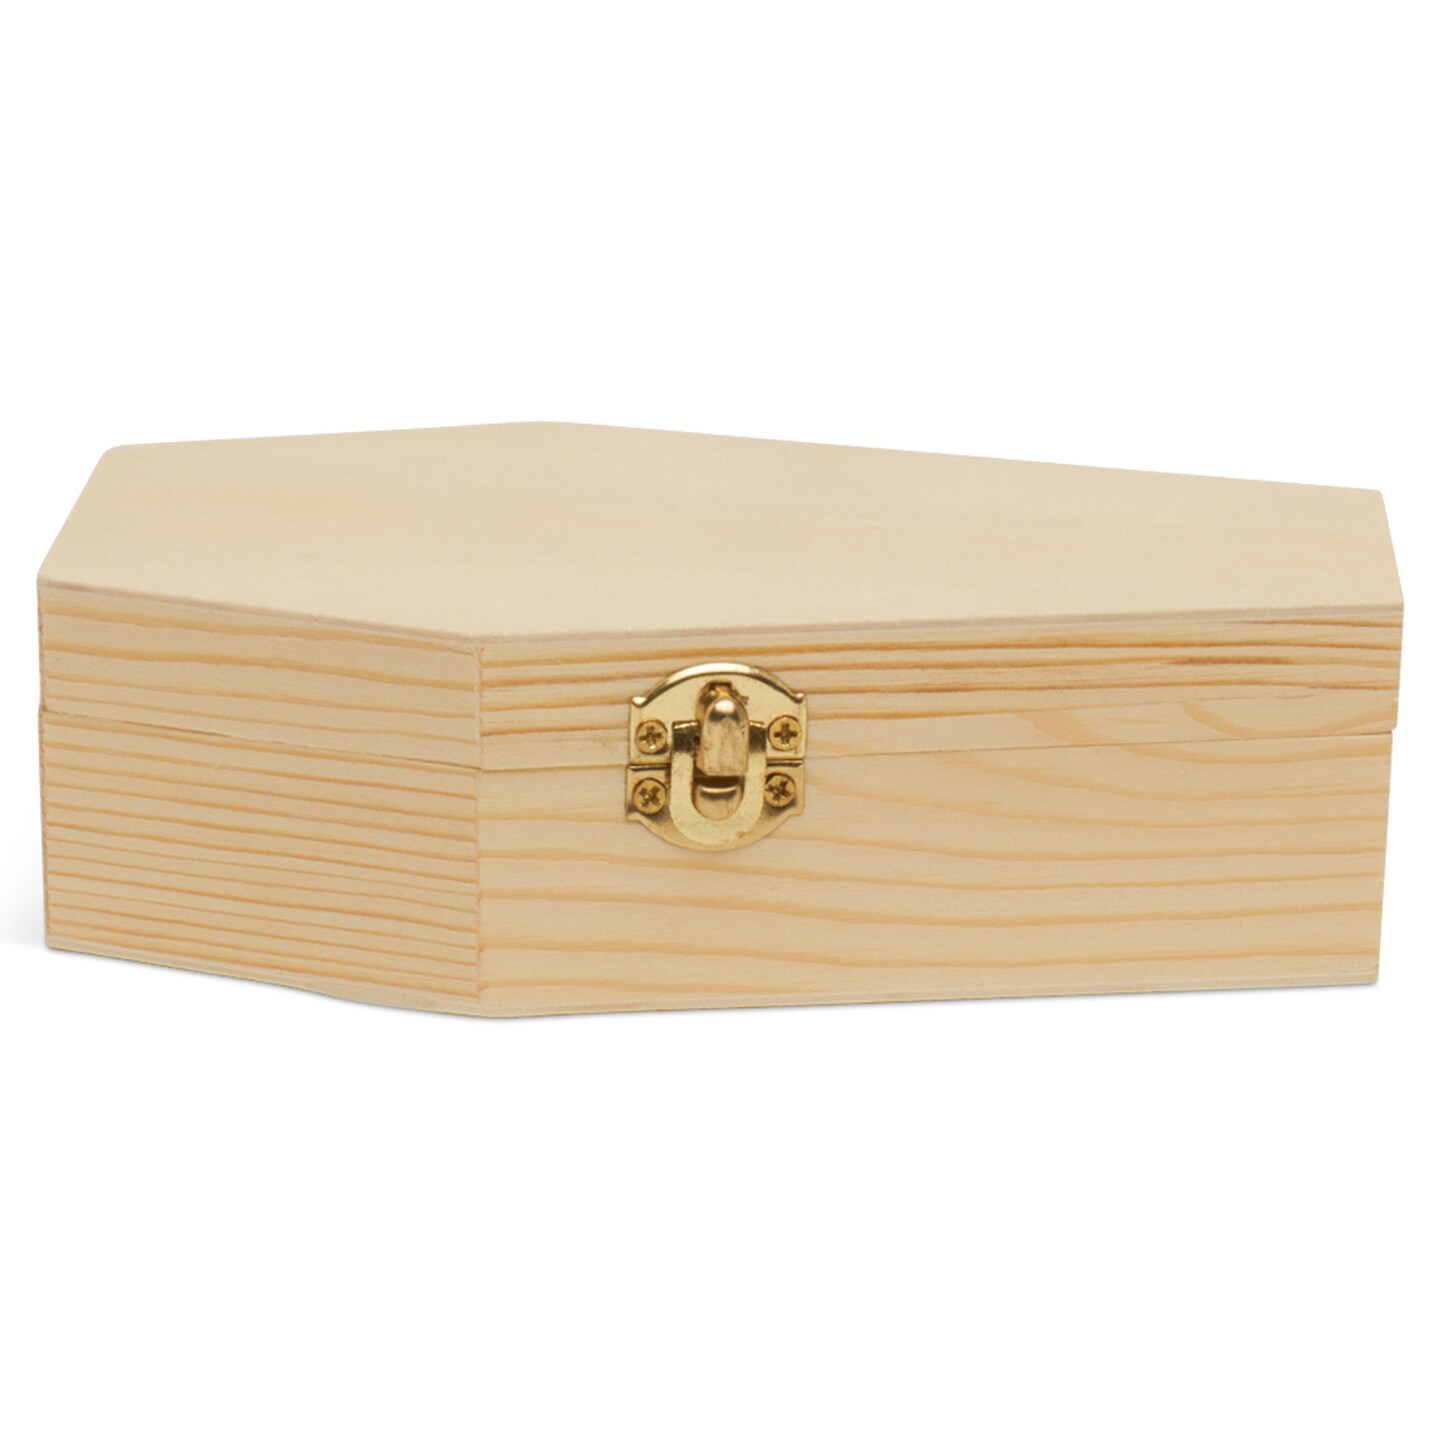 Wooden Coffin Box, Multiple Sizes Available, Unfinished, Halloween Decor, Pet Casket | Woodpeckers